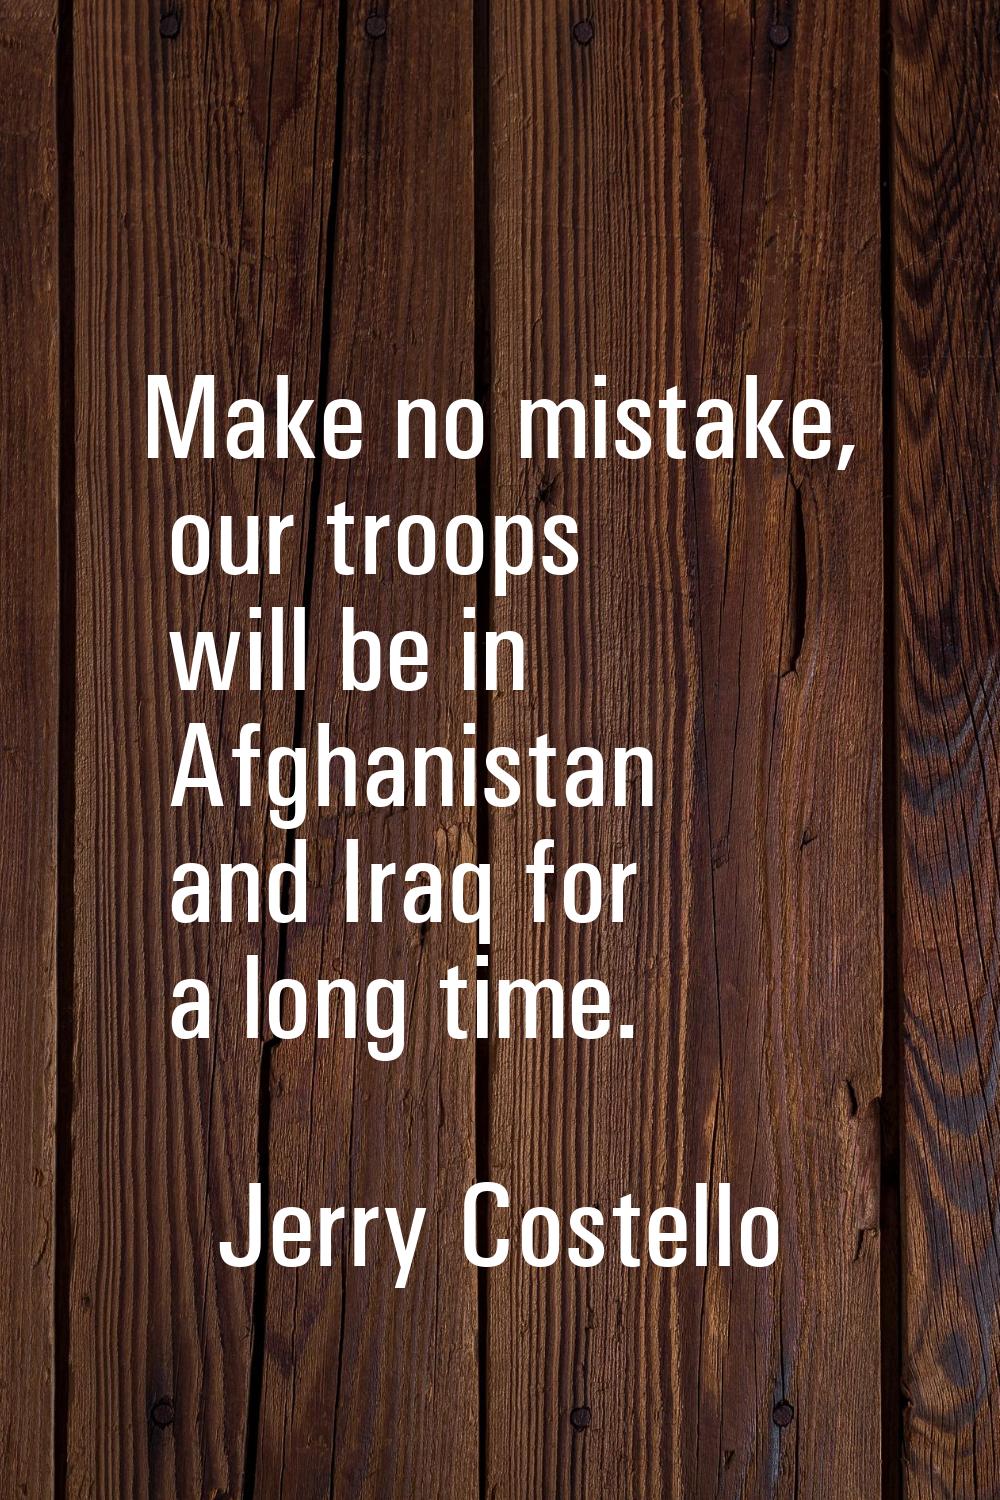 Make no mistake, our troops will be in Afghanistan and Iraq for a long time.